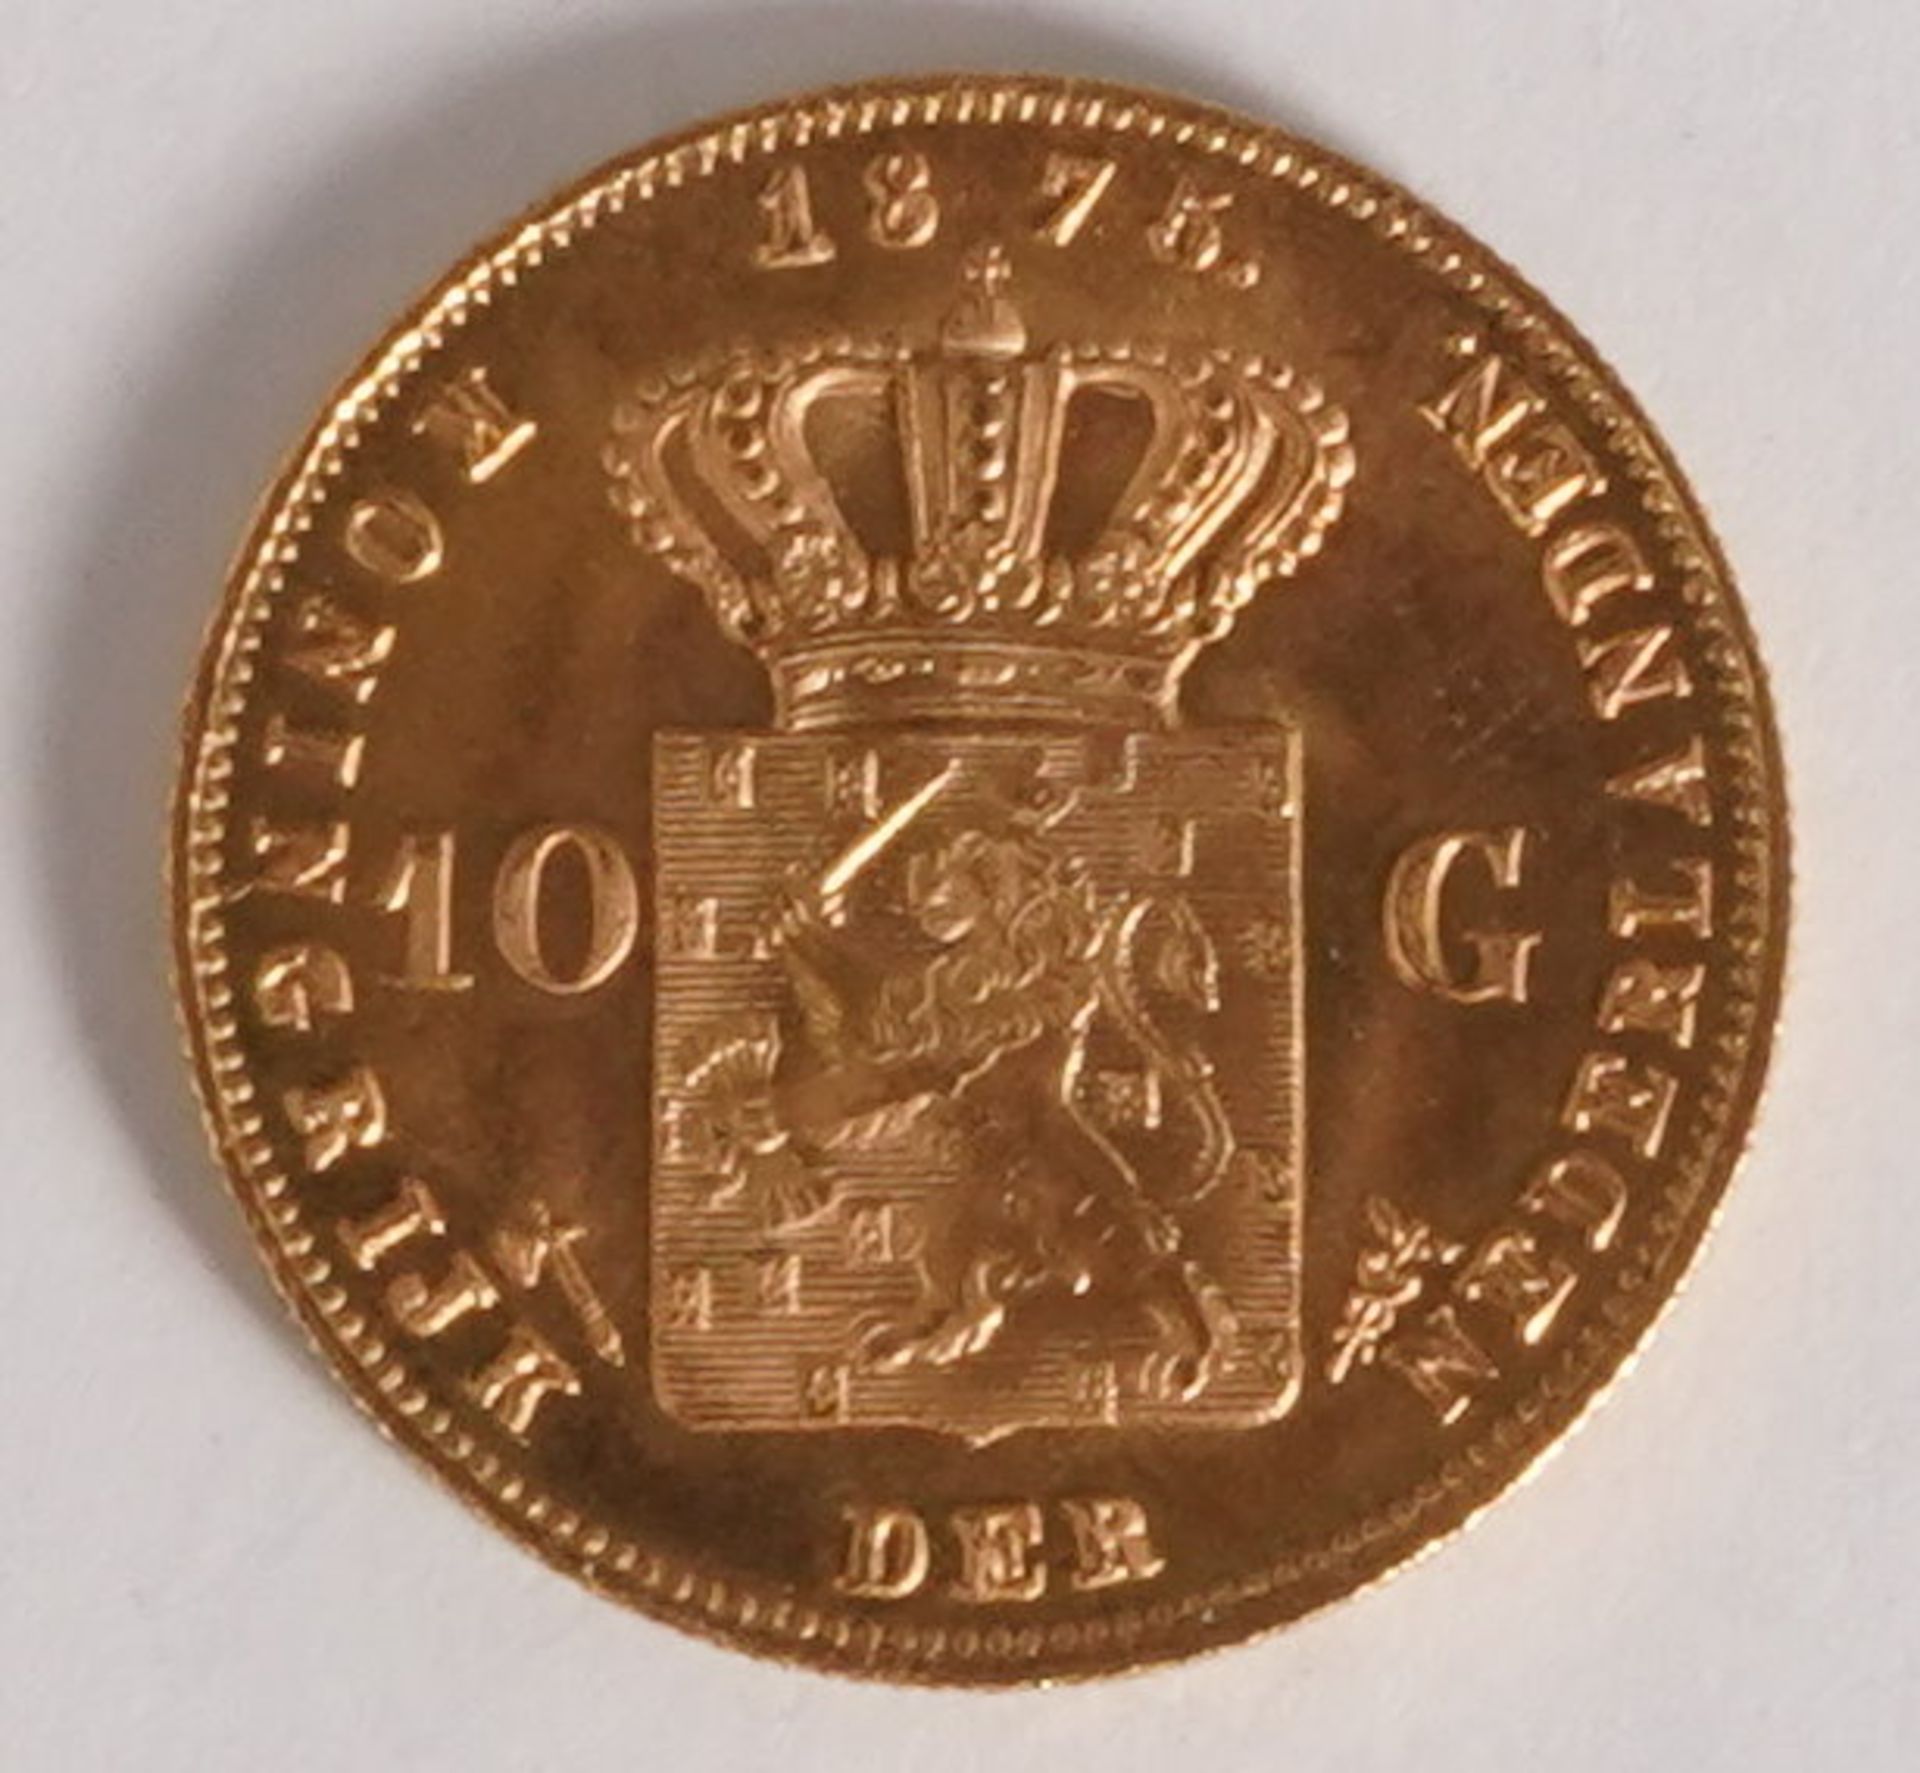 Gold coin 10 guilders - Image 2 of 2